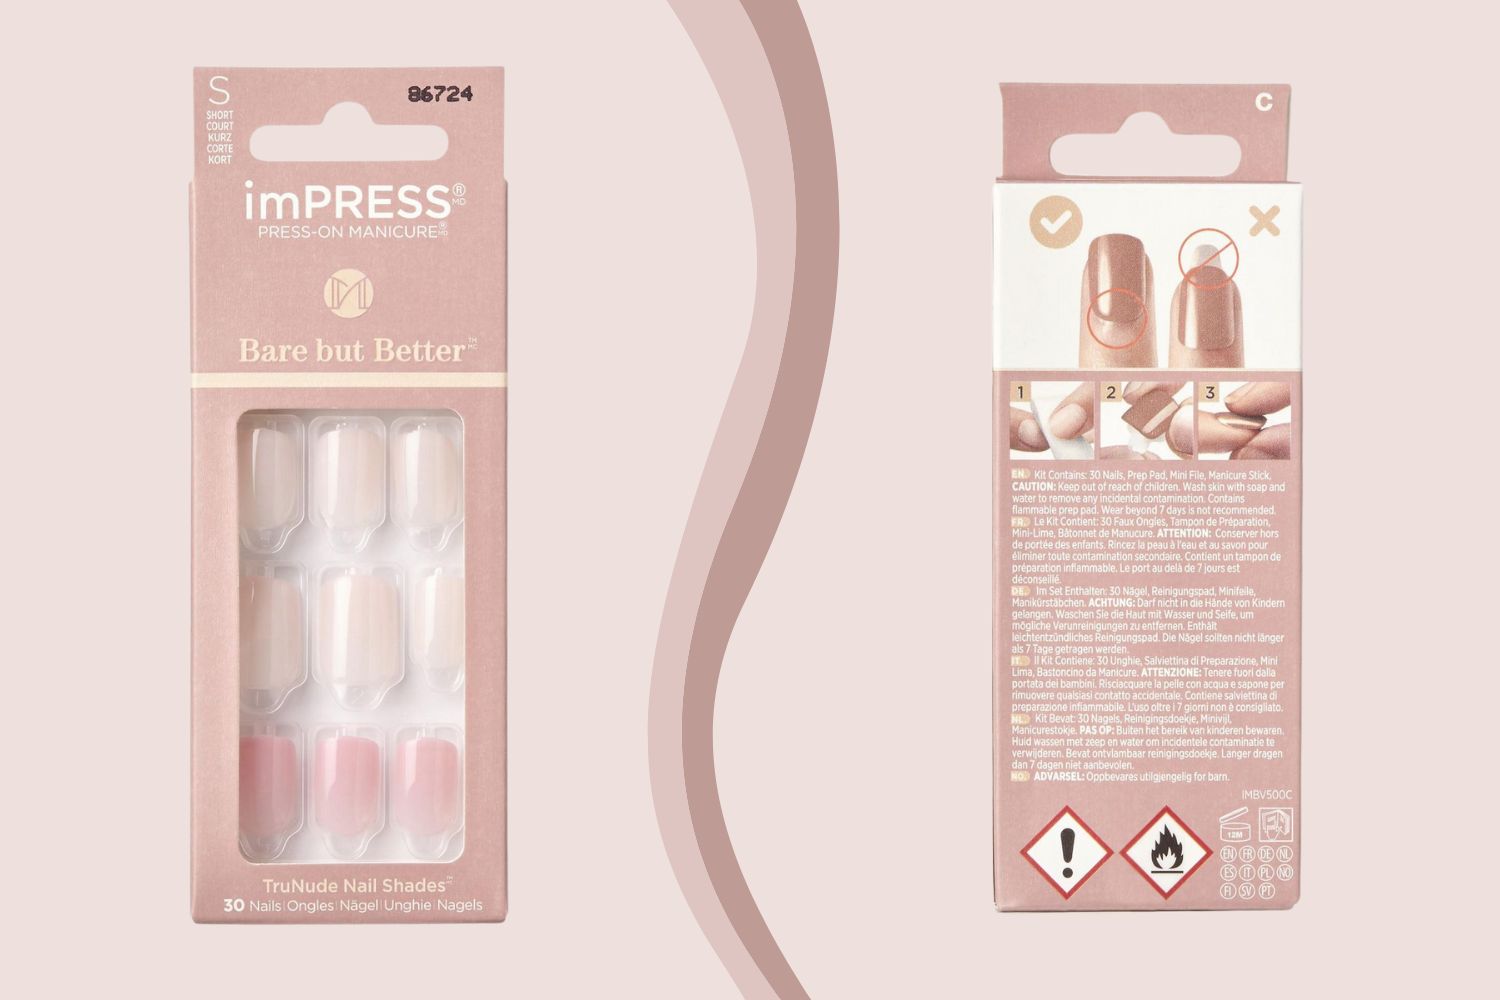 KISS imPRESS Bare but Better Press-on Manicure, viral beauty products